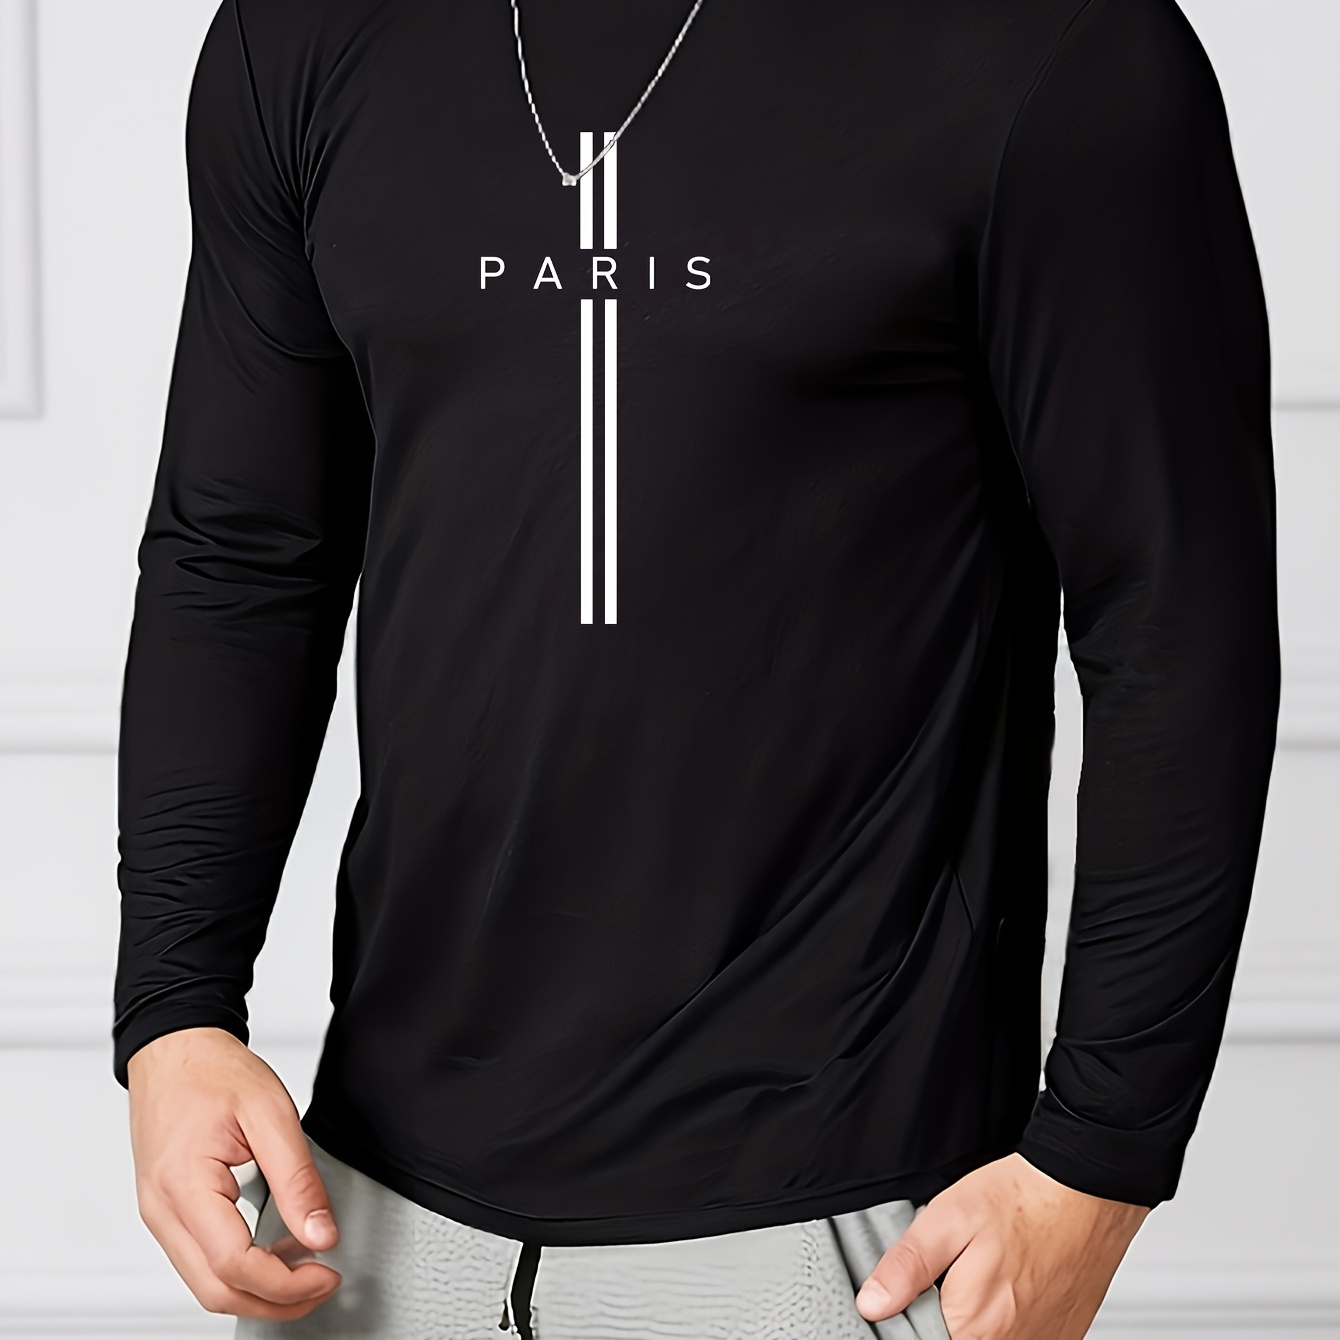 

Men's Long Sleeve T-shirt With " Paris " Print, Casual Round Neck Tee, Fashion Loose Fit, Sporty Versatile Top For Men